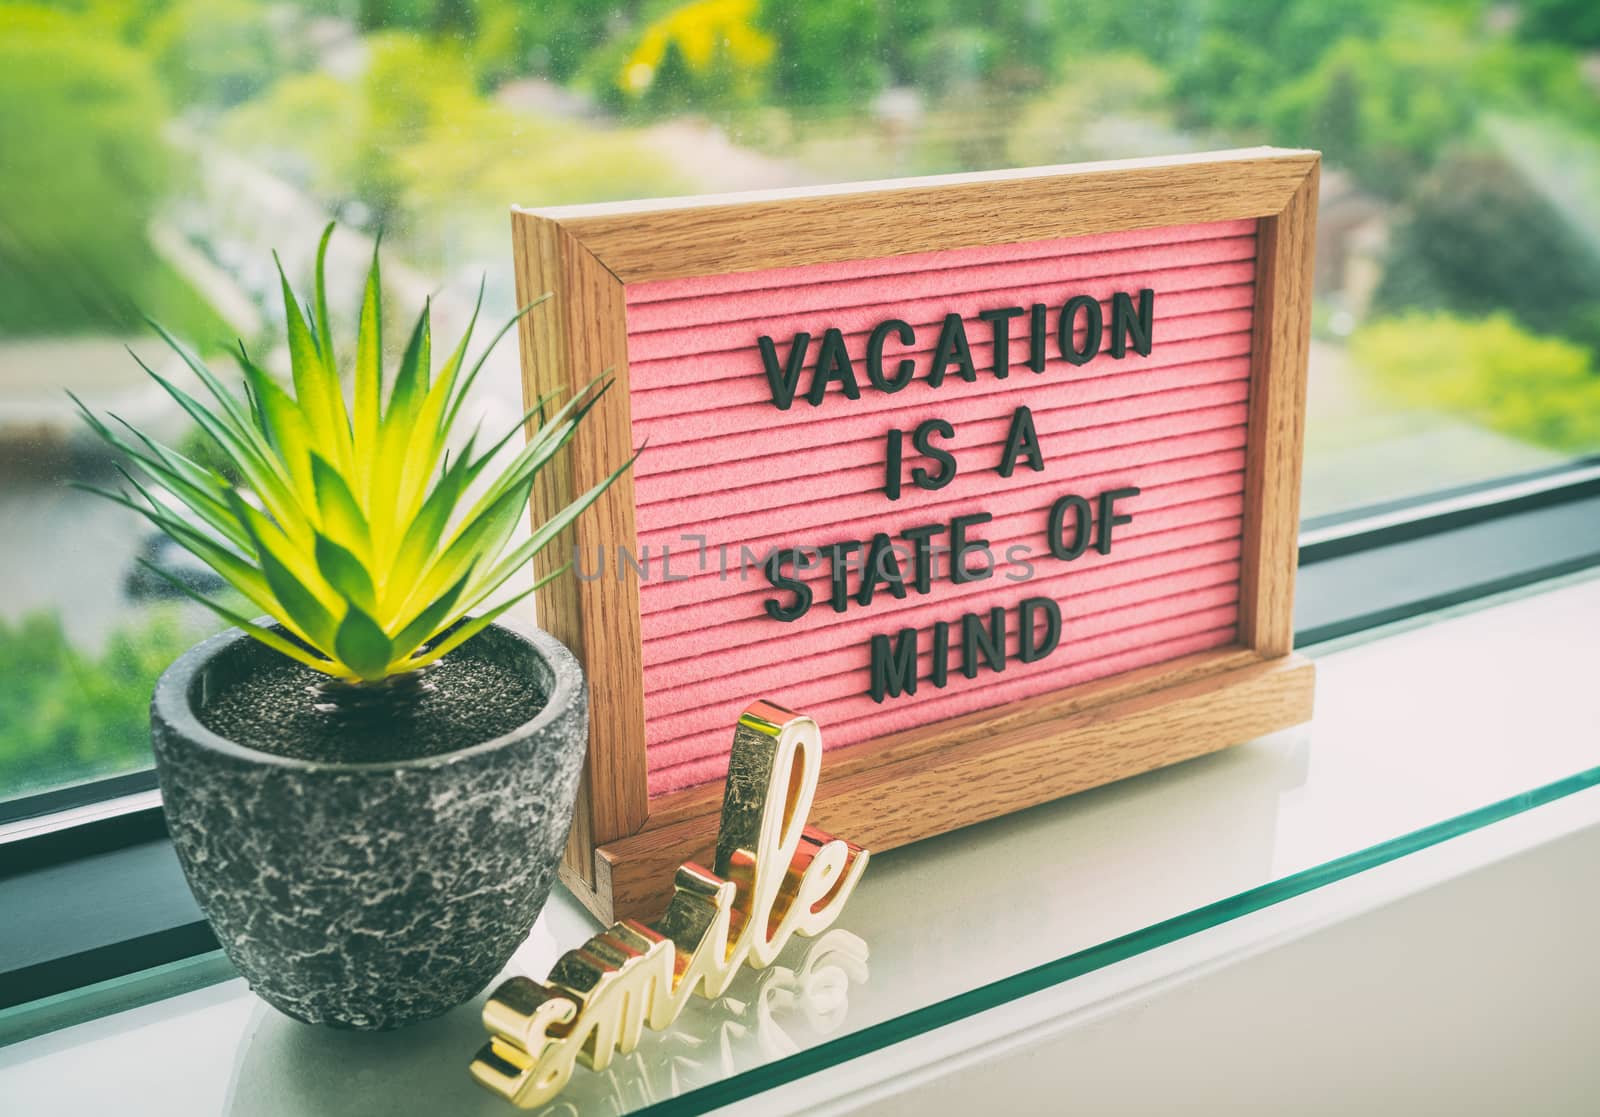 Vacation is a state of mind positive inspirational quote text on message board for summer holiday travel during COVID-19 coronavirus. Staycation pink felt board text for staying home by Maridav